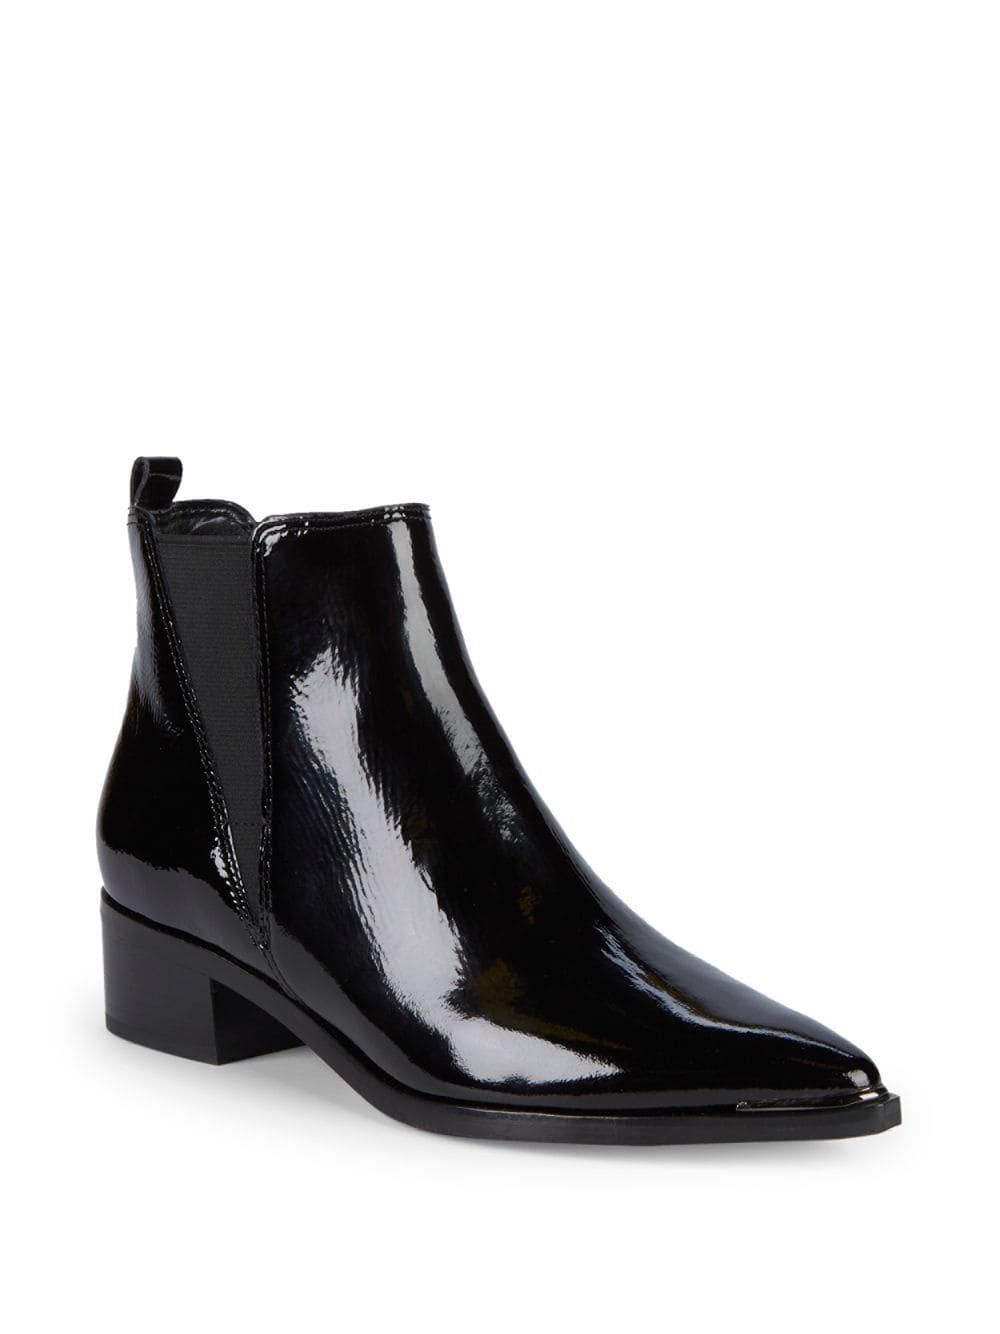 Marc Fisher Yale Patent Leather Booties in Black | Lyst